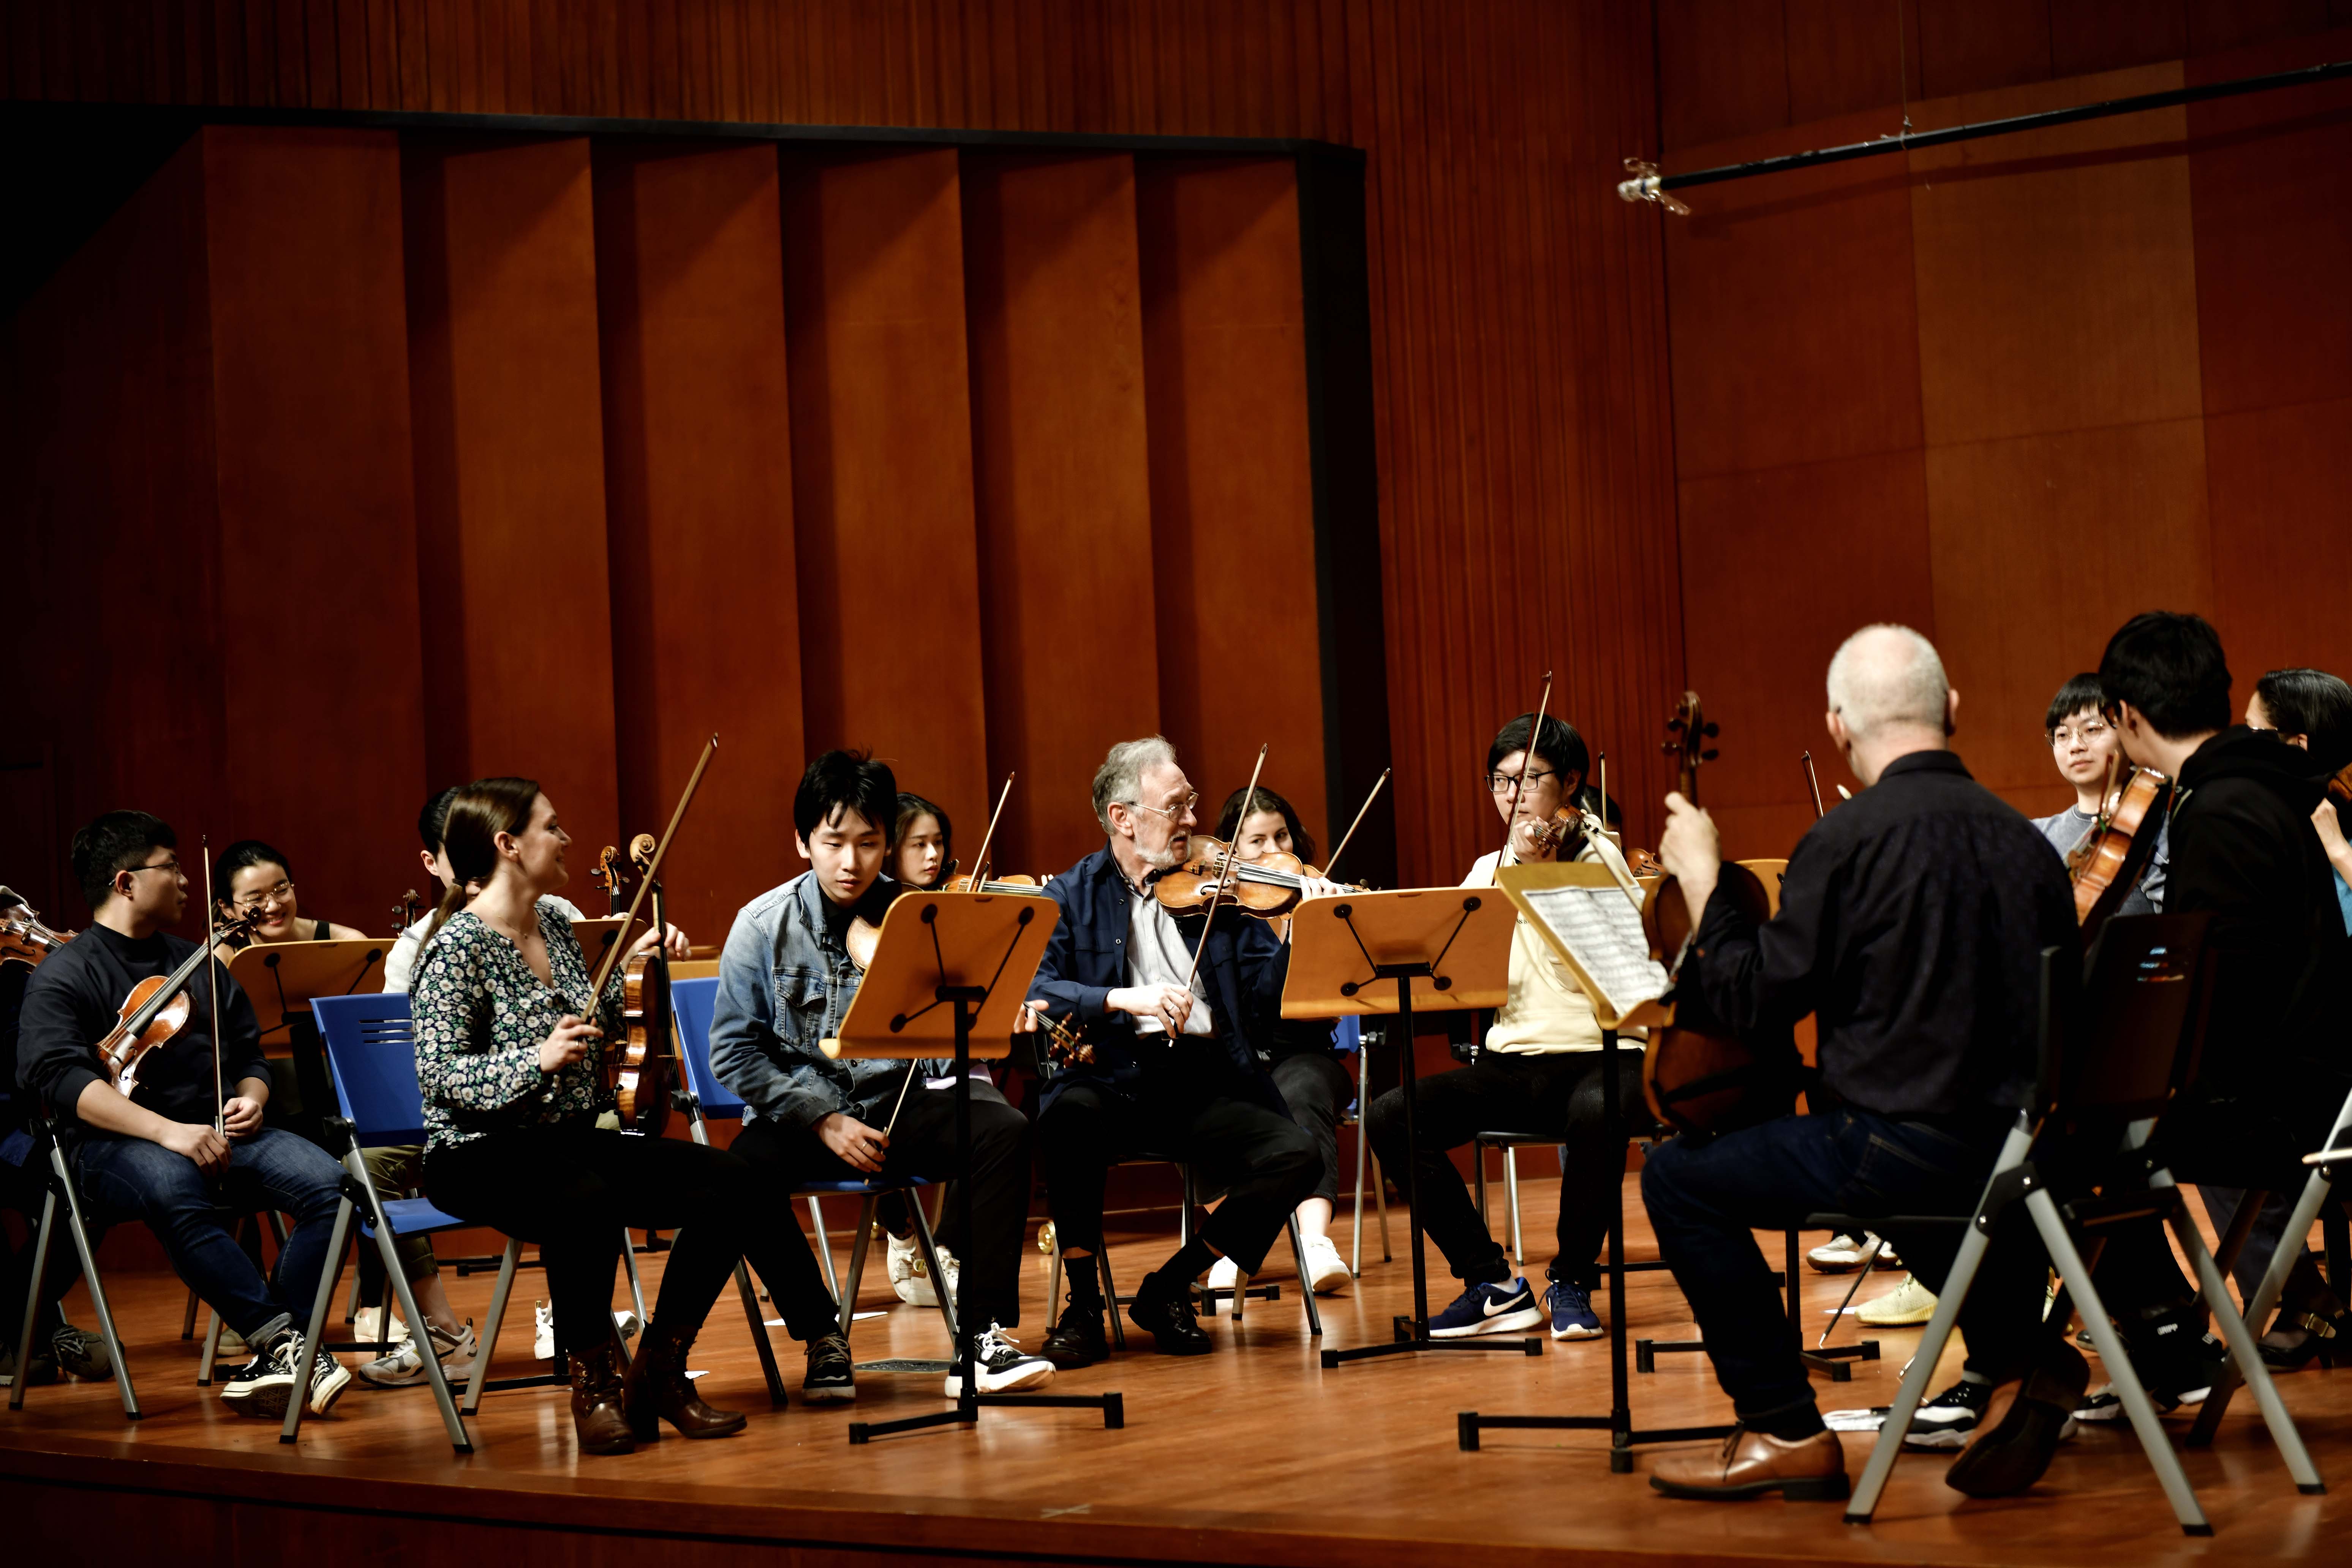 With the other student ensembles and the Juilliard String Quartet at The Tianjin Grand Theatre. Photo credit: Duan Chao 